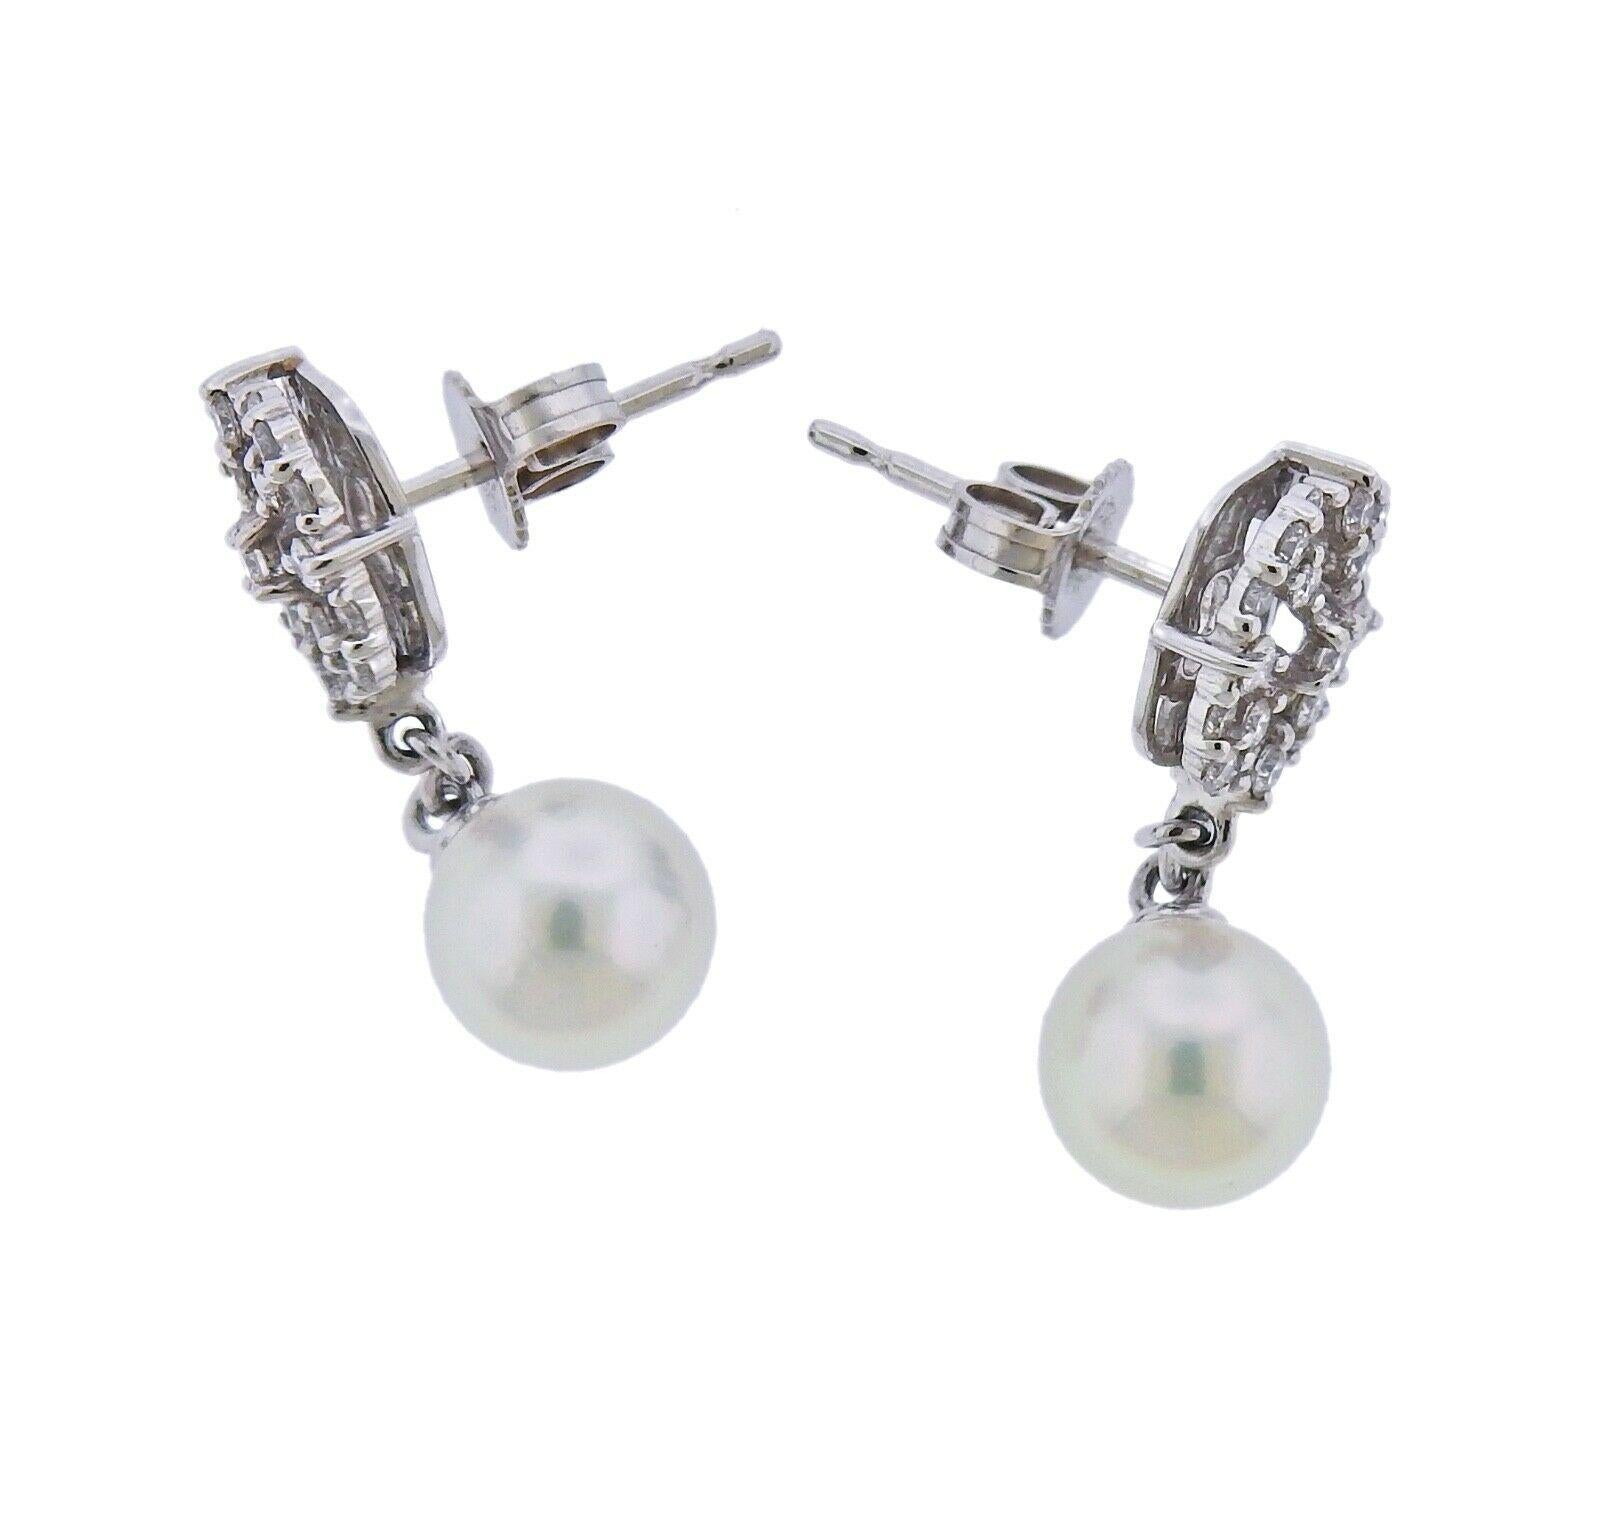 Pair of new Mikimoto earrings in 18k white gold with 7.5mm pearls and approx. 0.45ctw in G/VS diamonds. Retail $3300. Earrings are 25mm long. Weight - 5 grams. Marked: Mikimoto mark, 750.